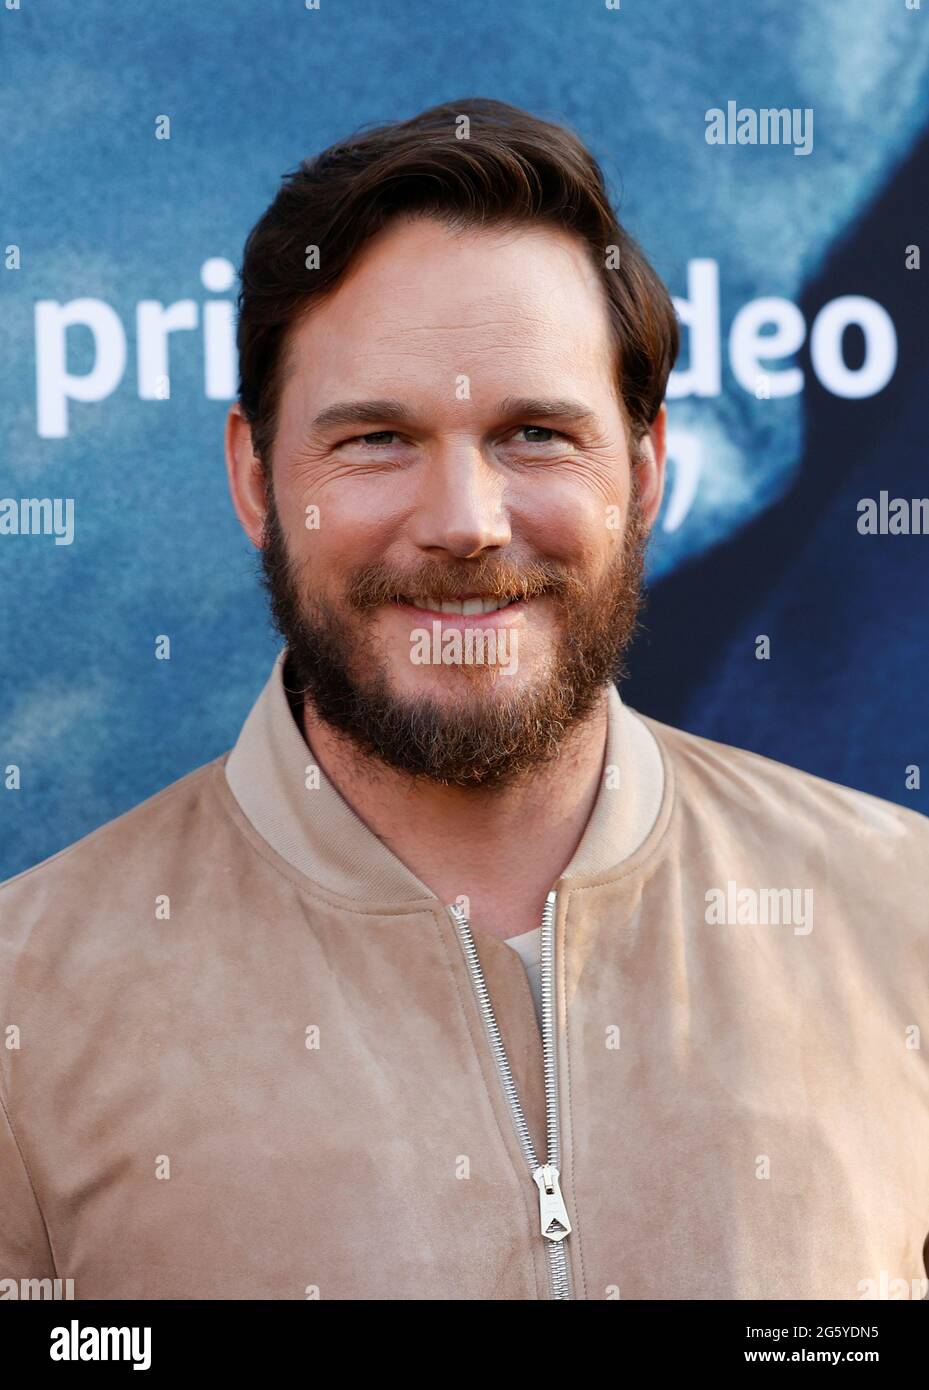 Cast member Chris Pratt poses as he attends the premiere for the film 'The Tomorrow War' at Banc of California Stadium in Los Angeles, California, U.S., June 30, 2021. REUTERS/Mario Anzuoni Stock Photo